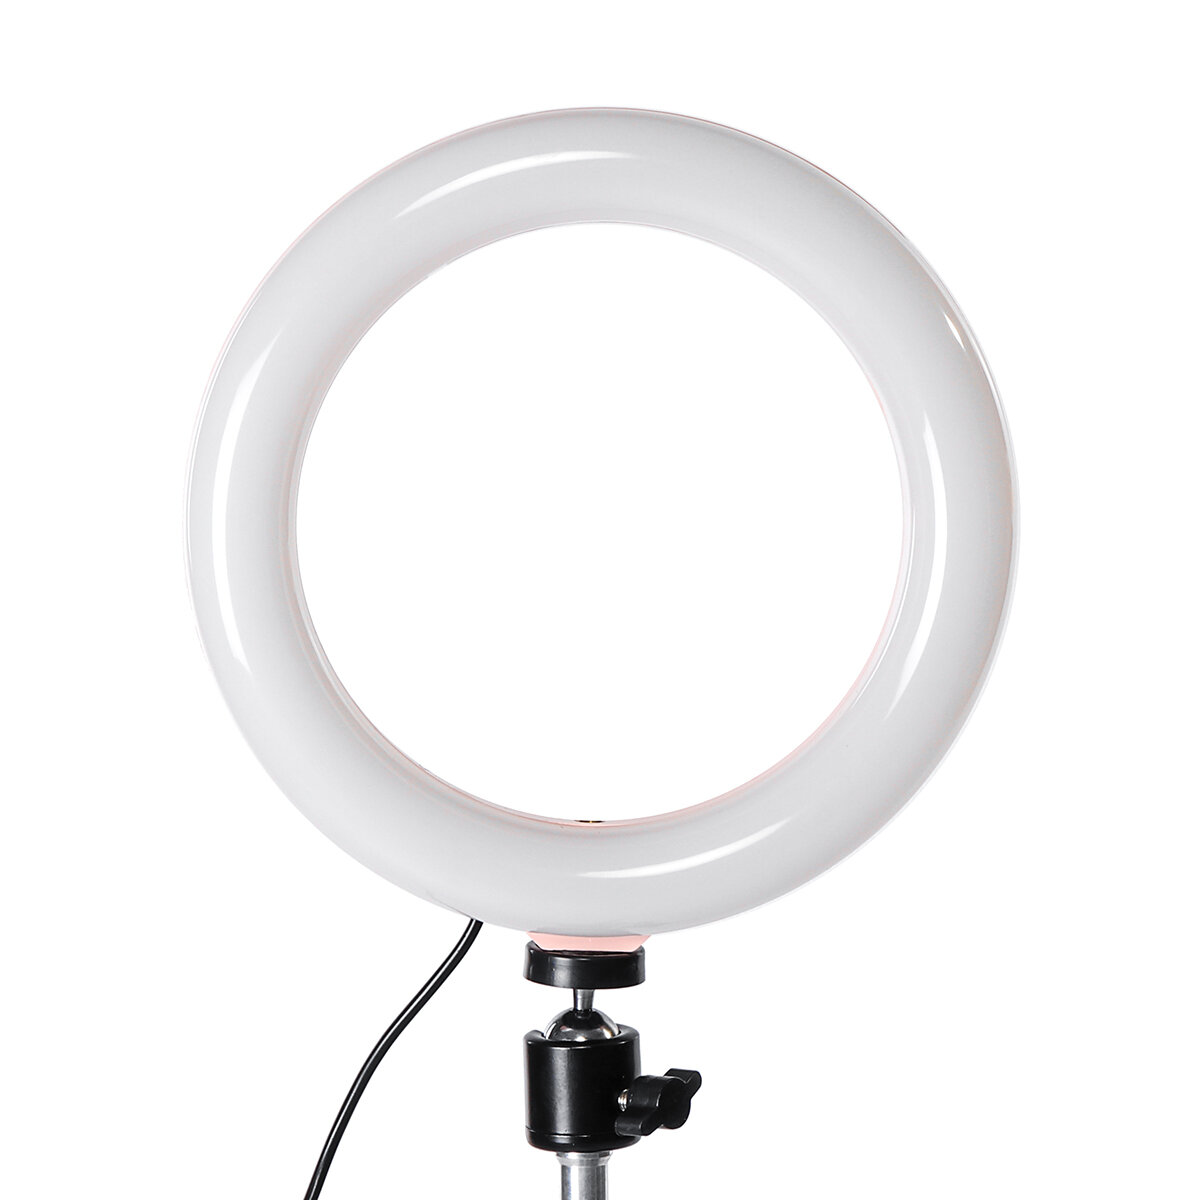 96 LED Ring Light 3 Colors 6500K Studio Photography Photo Selfie Fill Light for iPhone Smartphone Youtube Makeup Live St